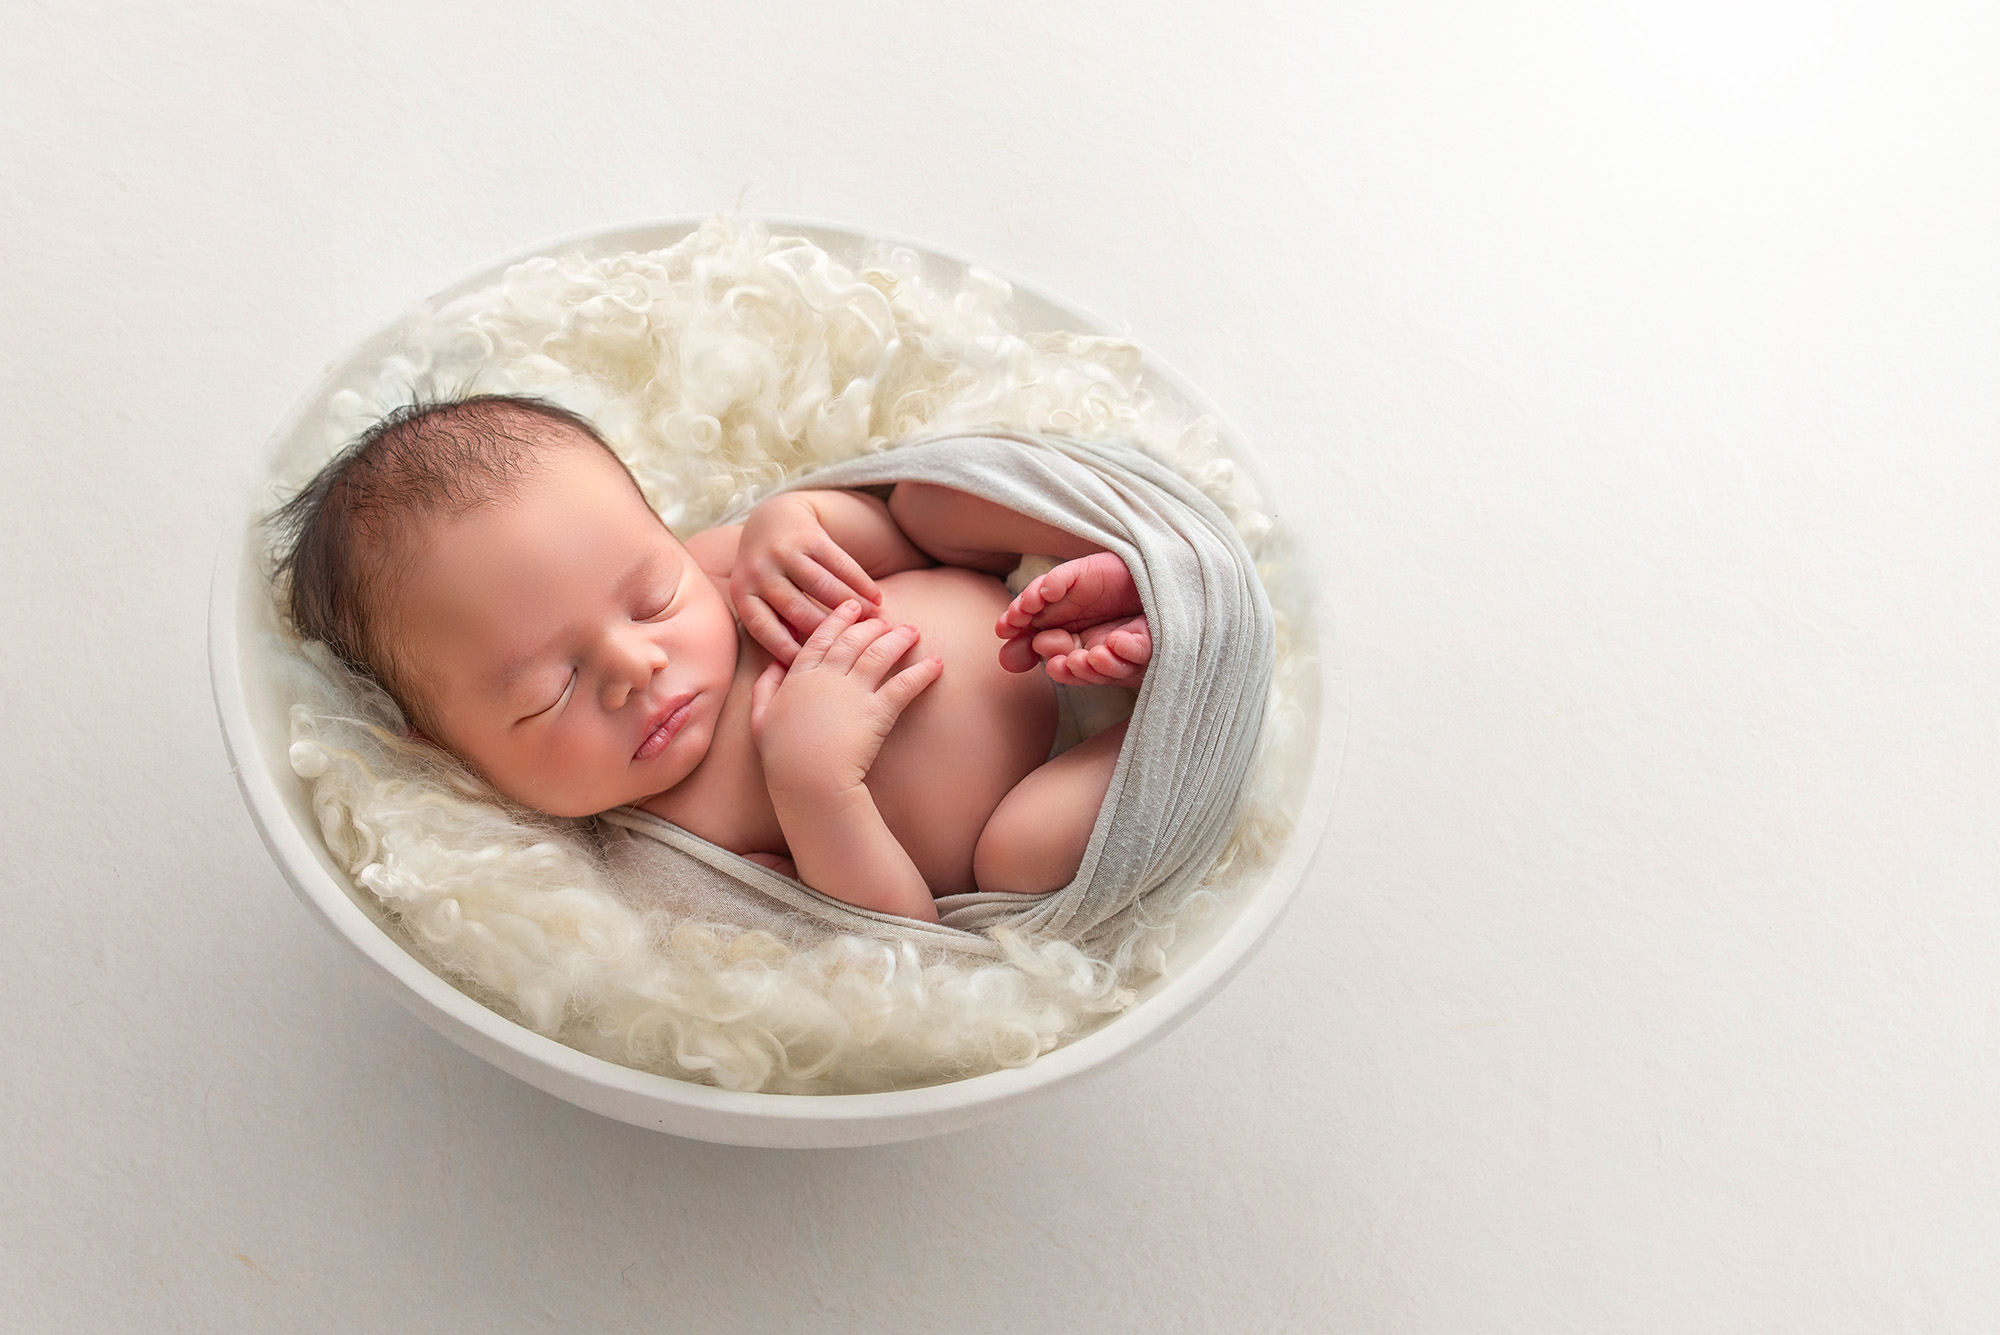 best time to take newborn photos baby sleeping in a bowl